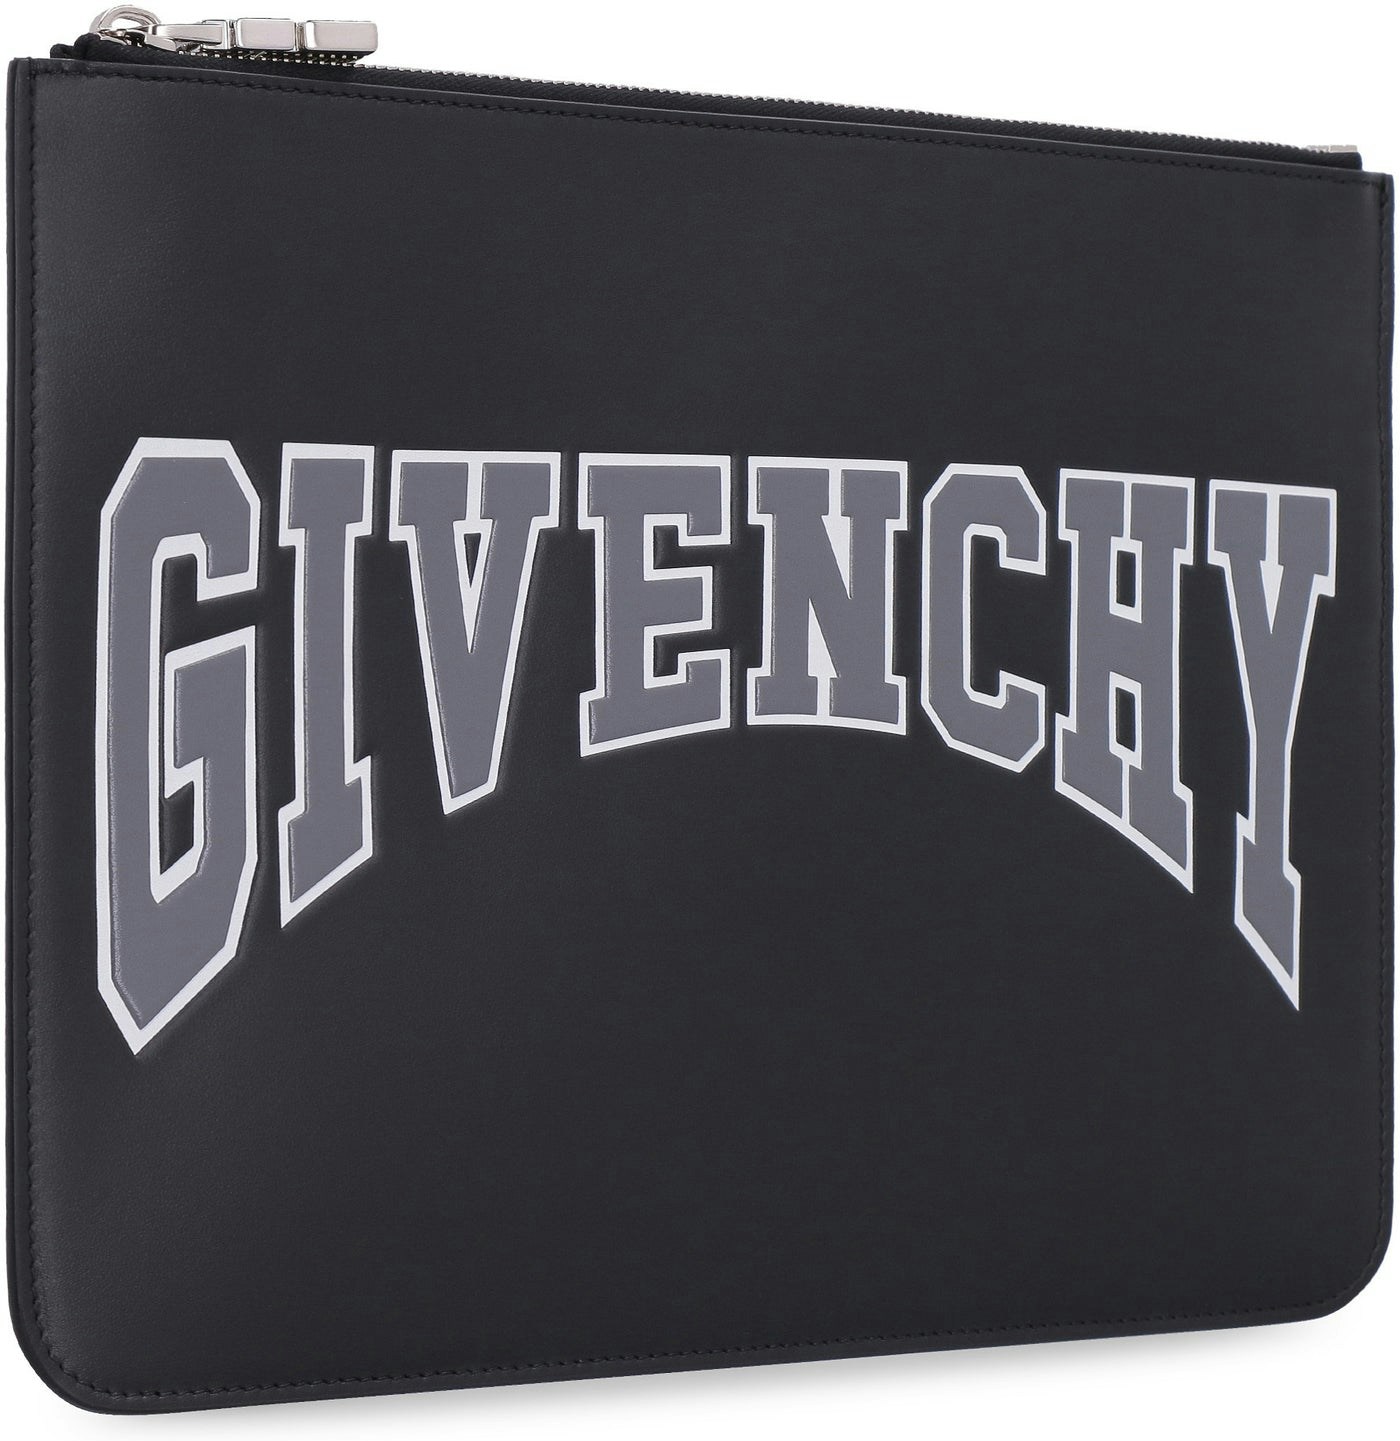 001 GIVENCHY LOGO DETAIL FLAT LEATHER POUCH